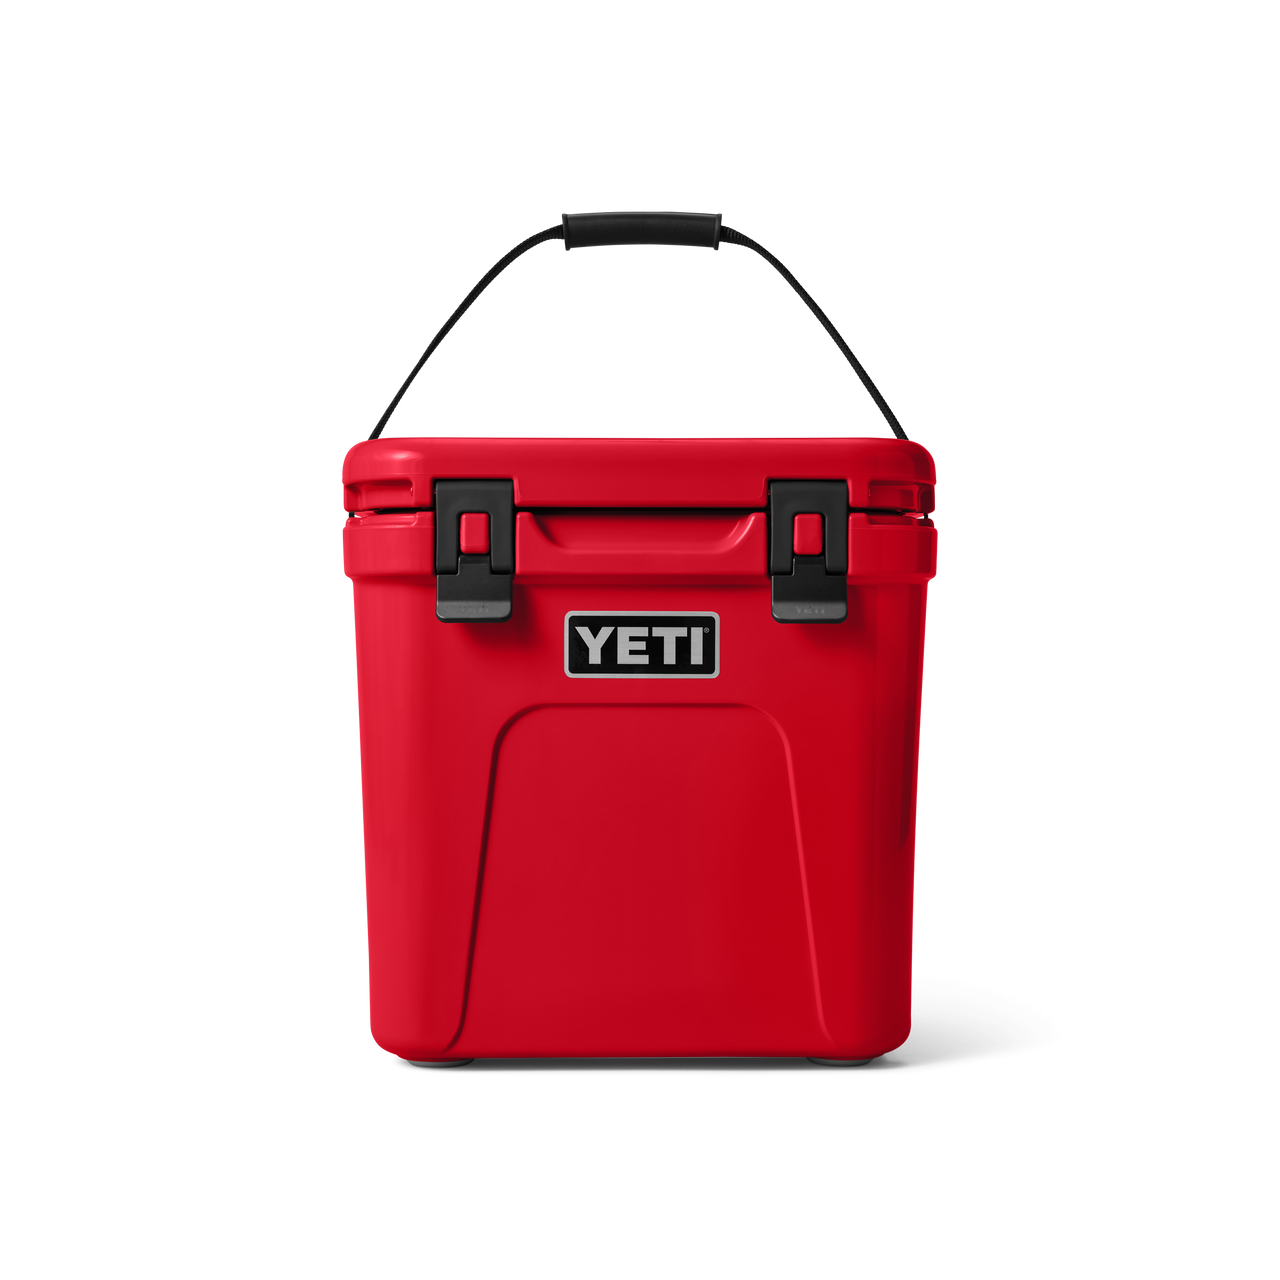 YETI Roadie 24 Cooler- Harvest Red NWT discontinued RARE. NICE!